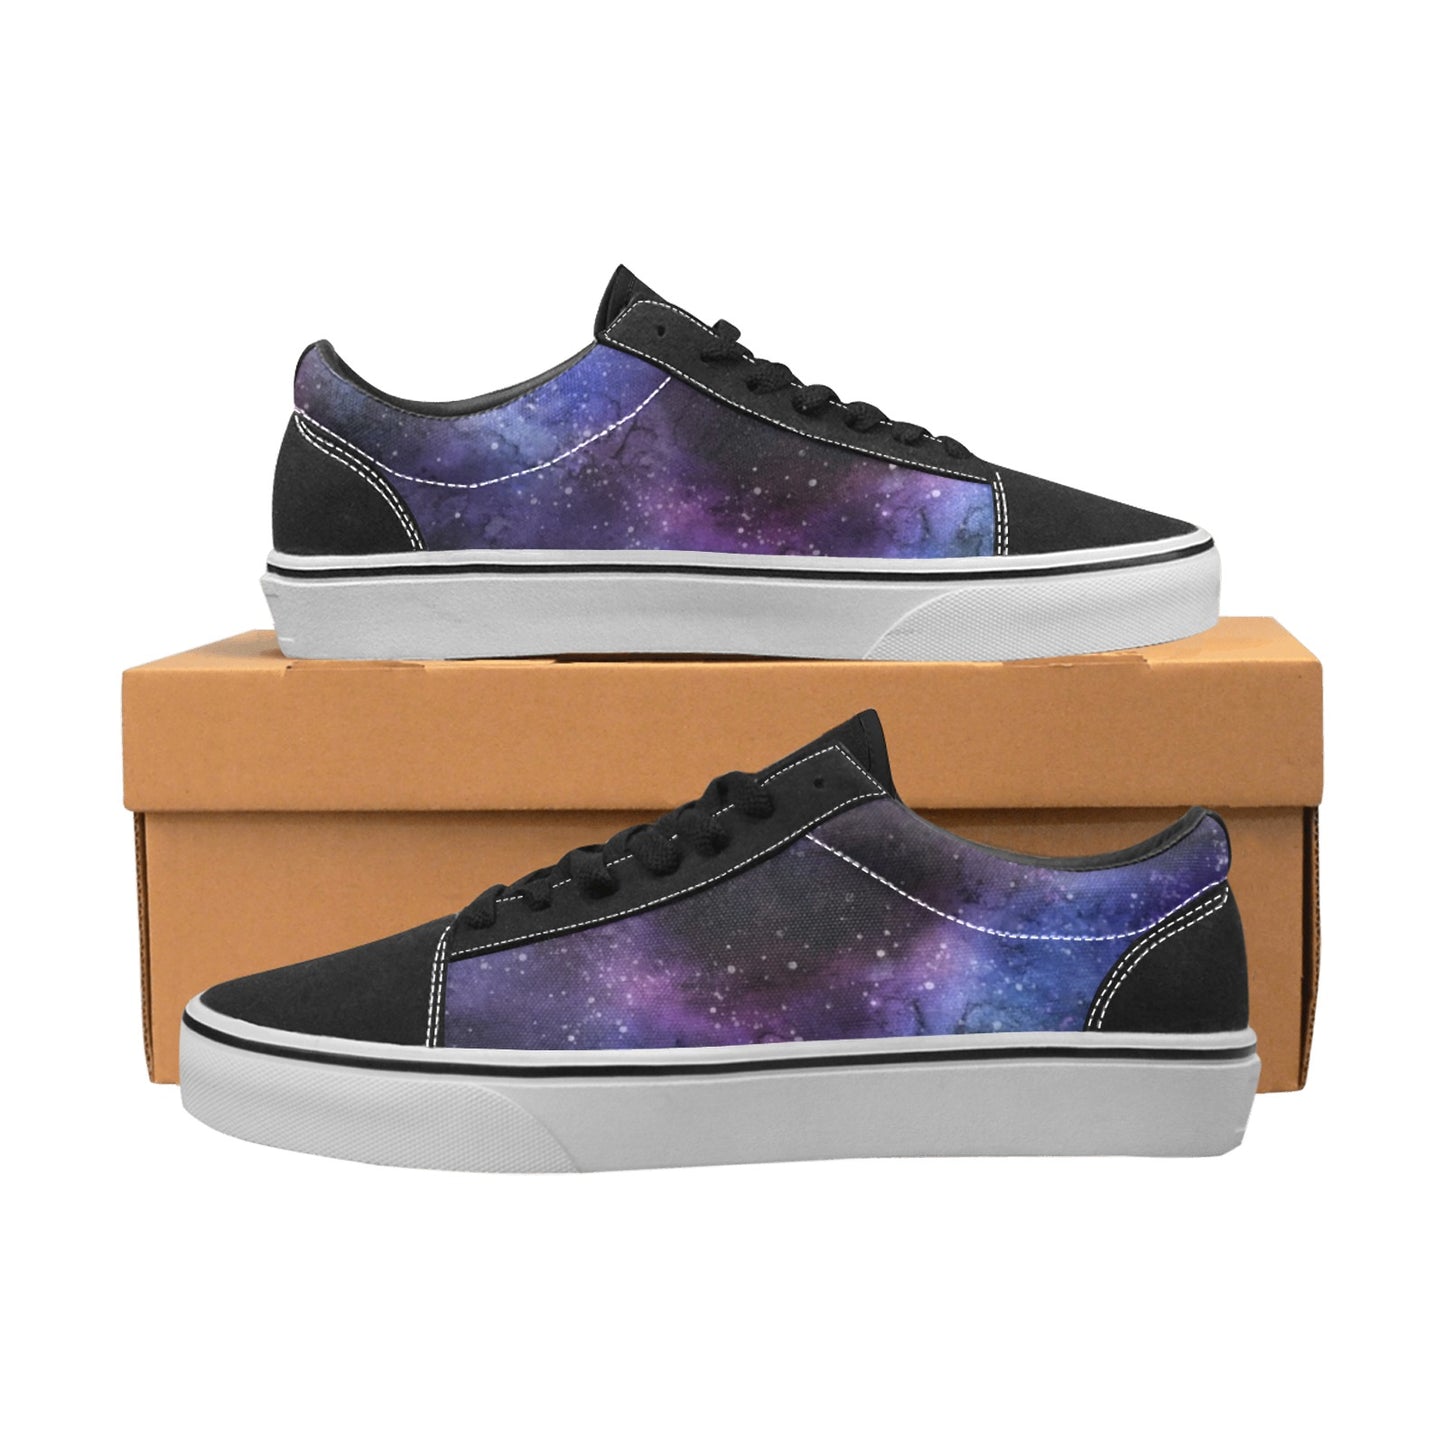 Galaxy Women Shoes, Stars Space Purple Black Vegan Faux Suede Leather Print Lace-Up Canvas Casual Designer Sneakers